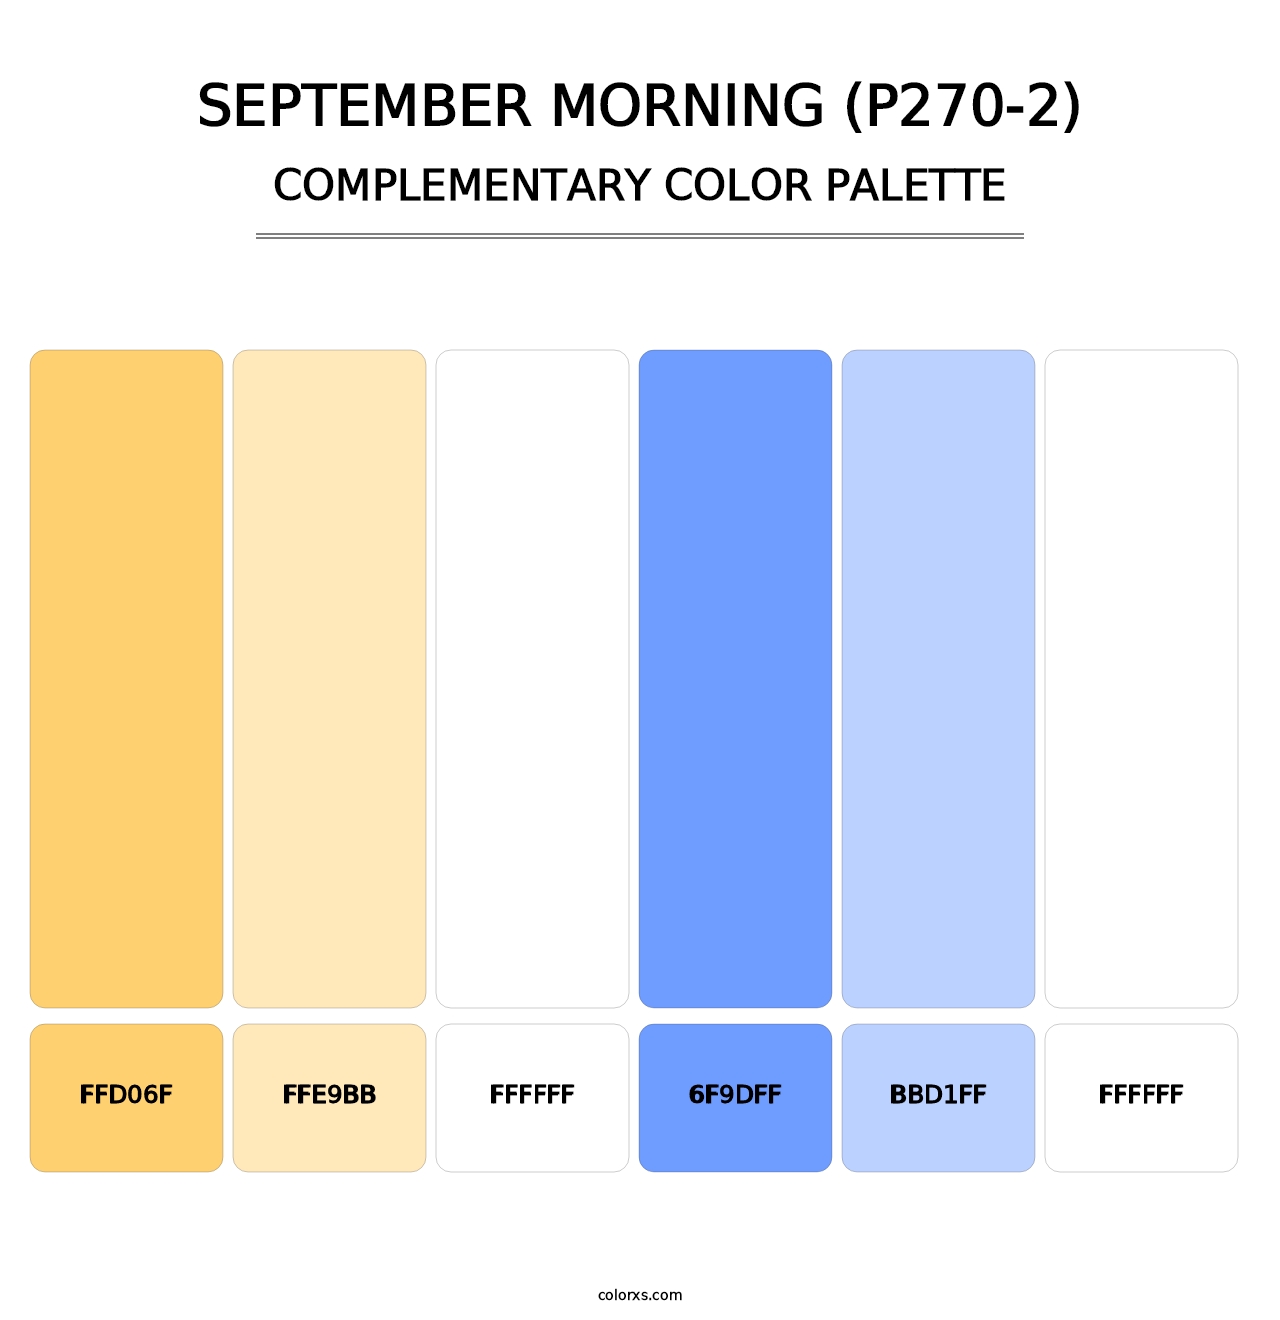 September Morning (P270-2) - Complementary Color Palette